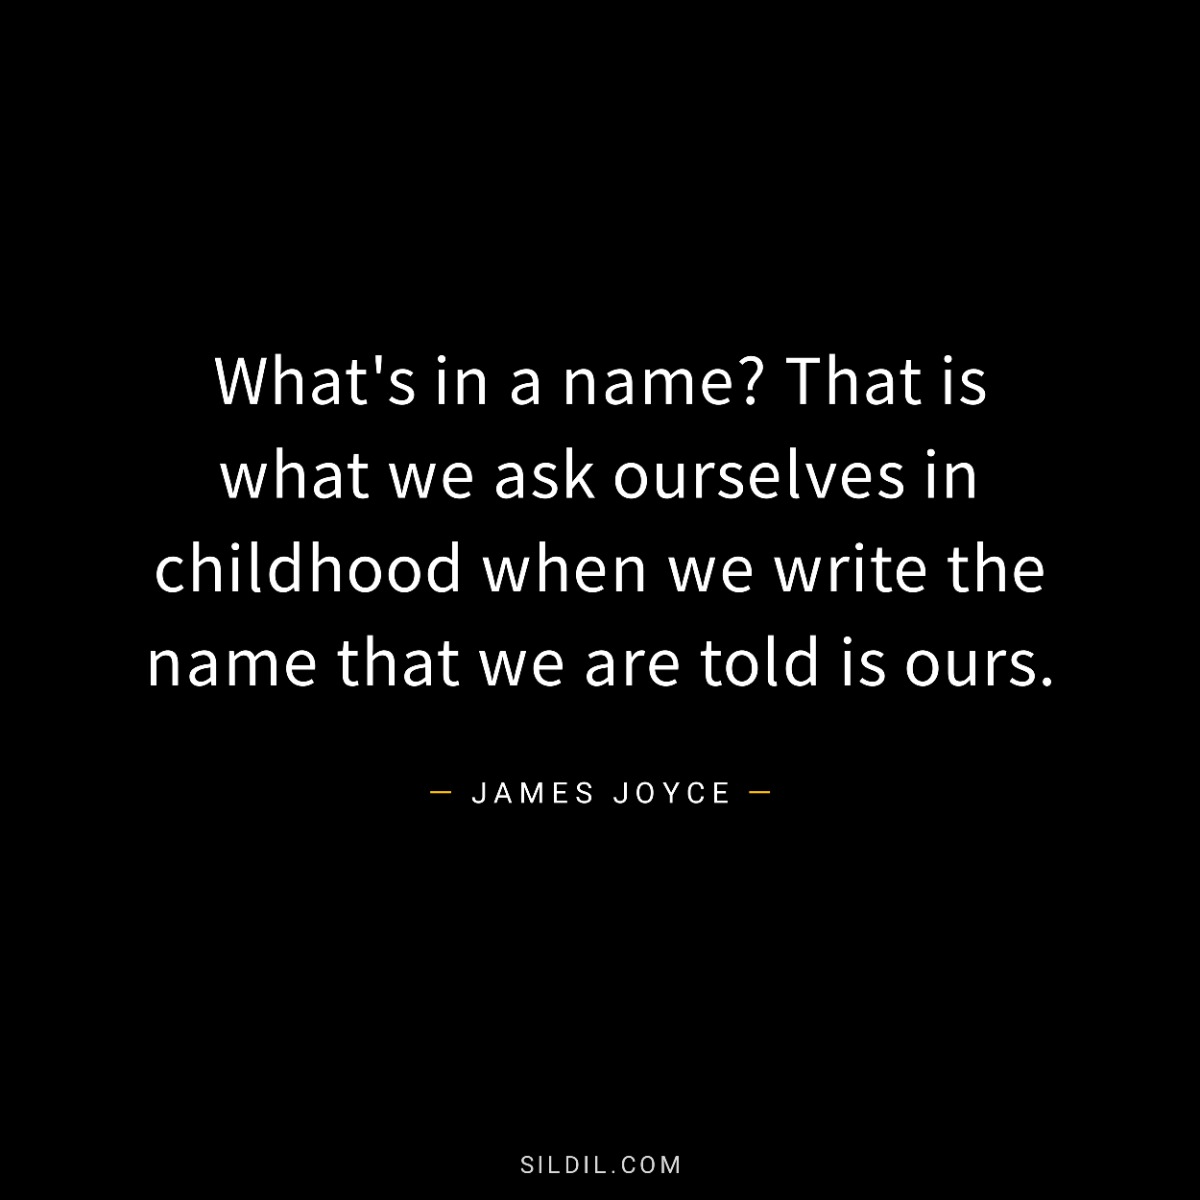 What's in a name? That is what we ask ourselves in childhood when we write the name that we are told is ours.